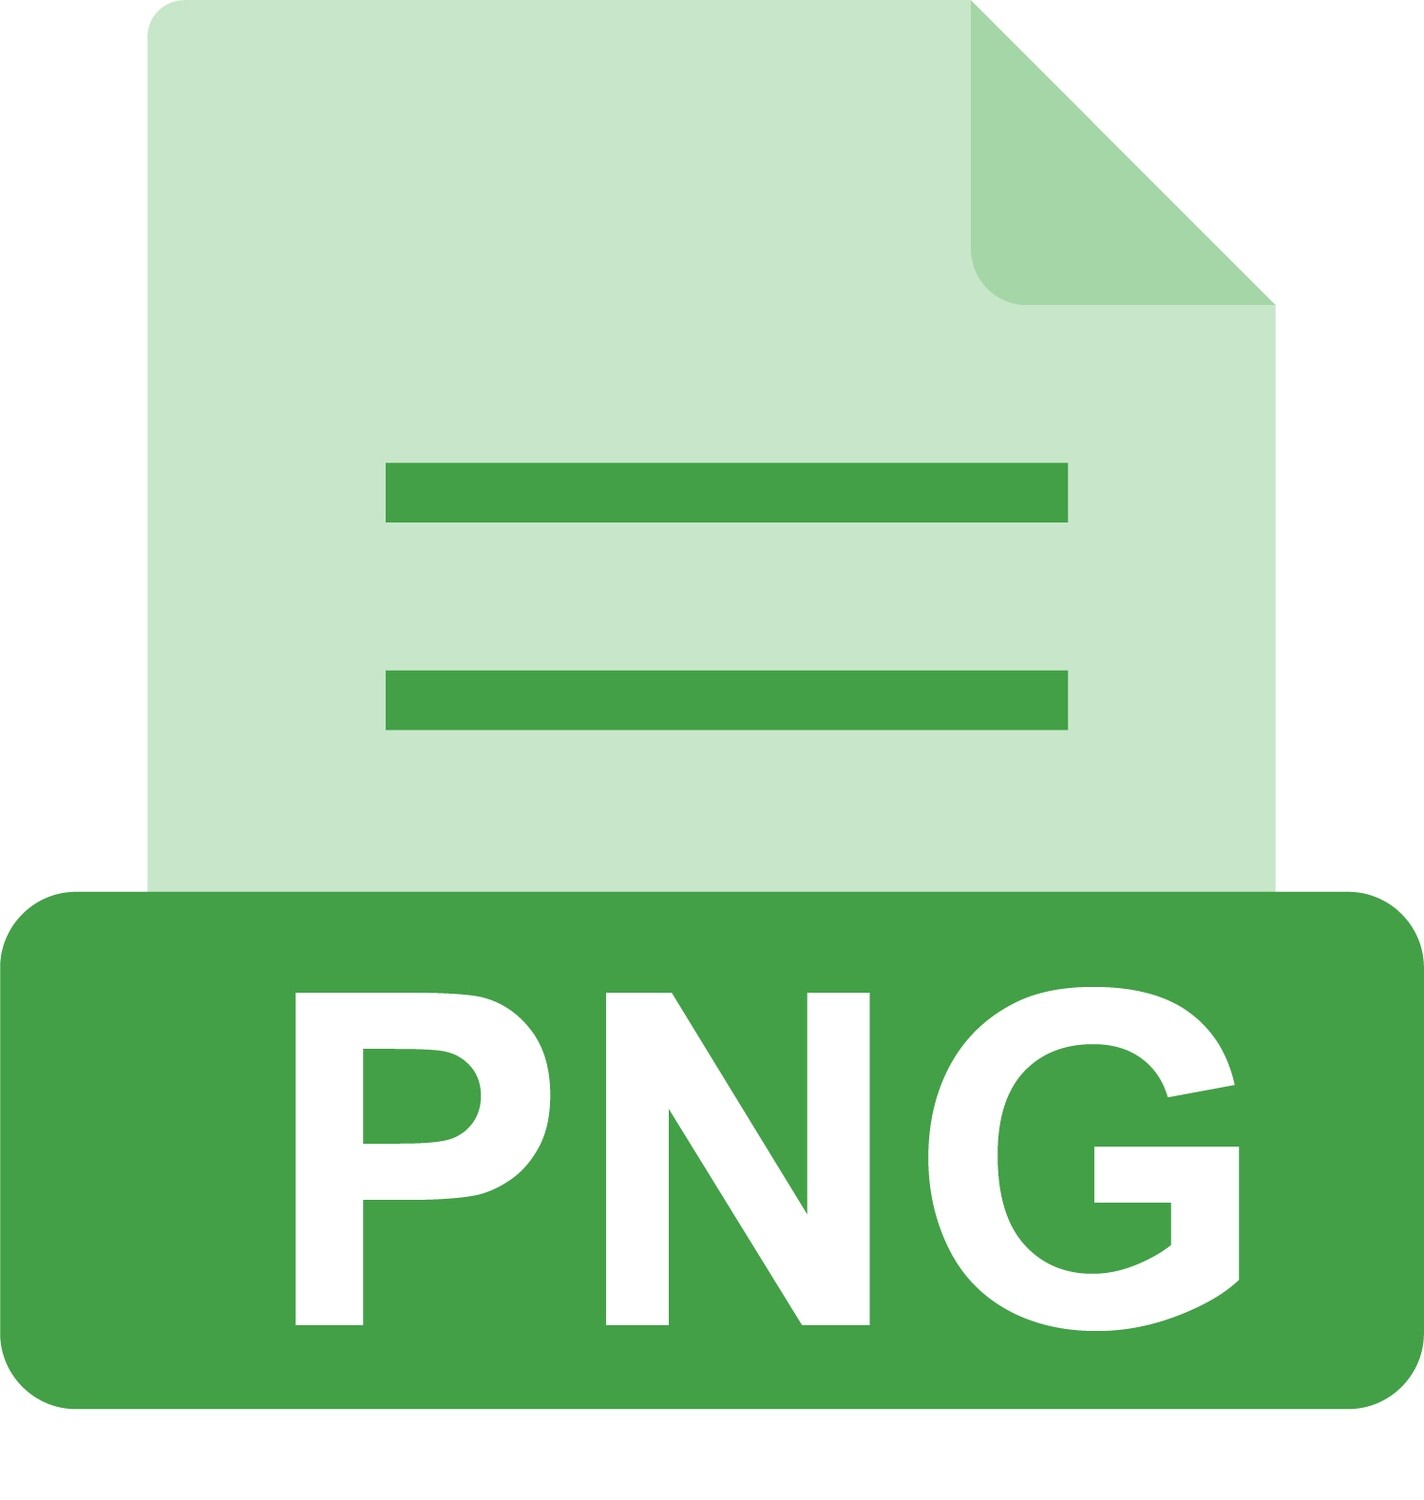 E-File: PNG, PE District of Columbia